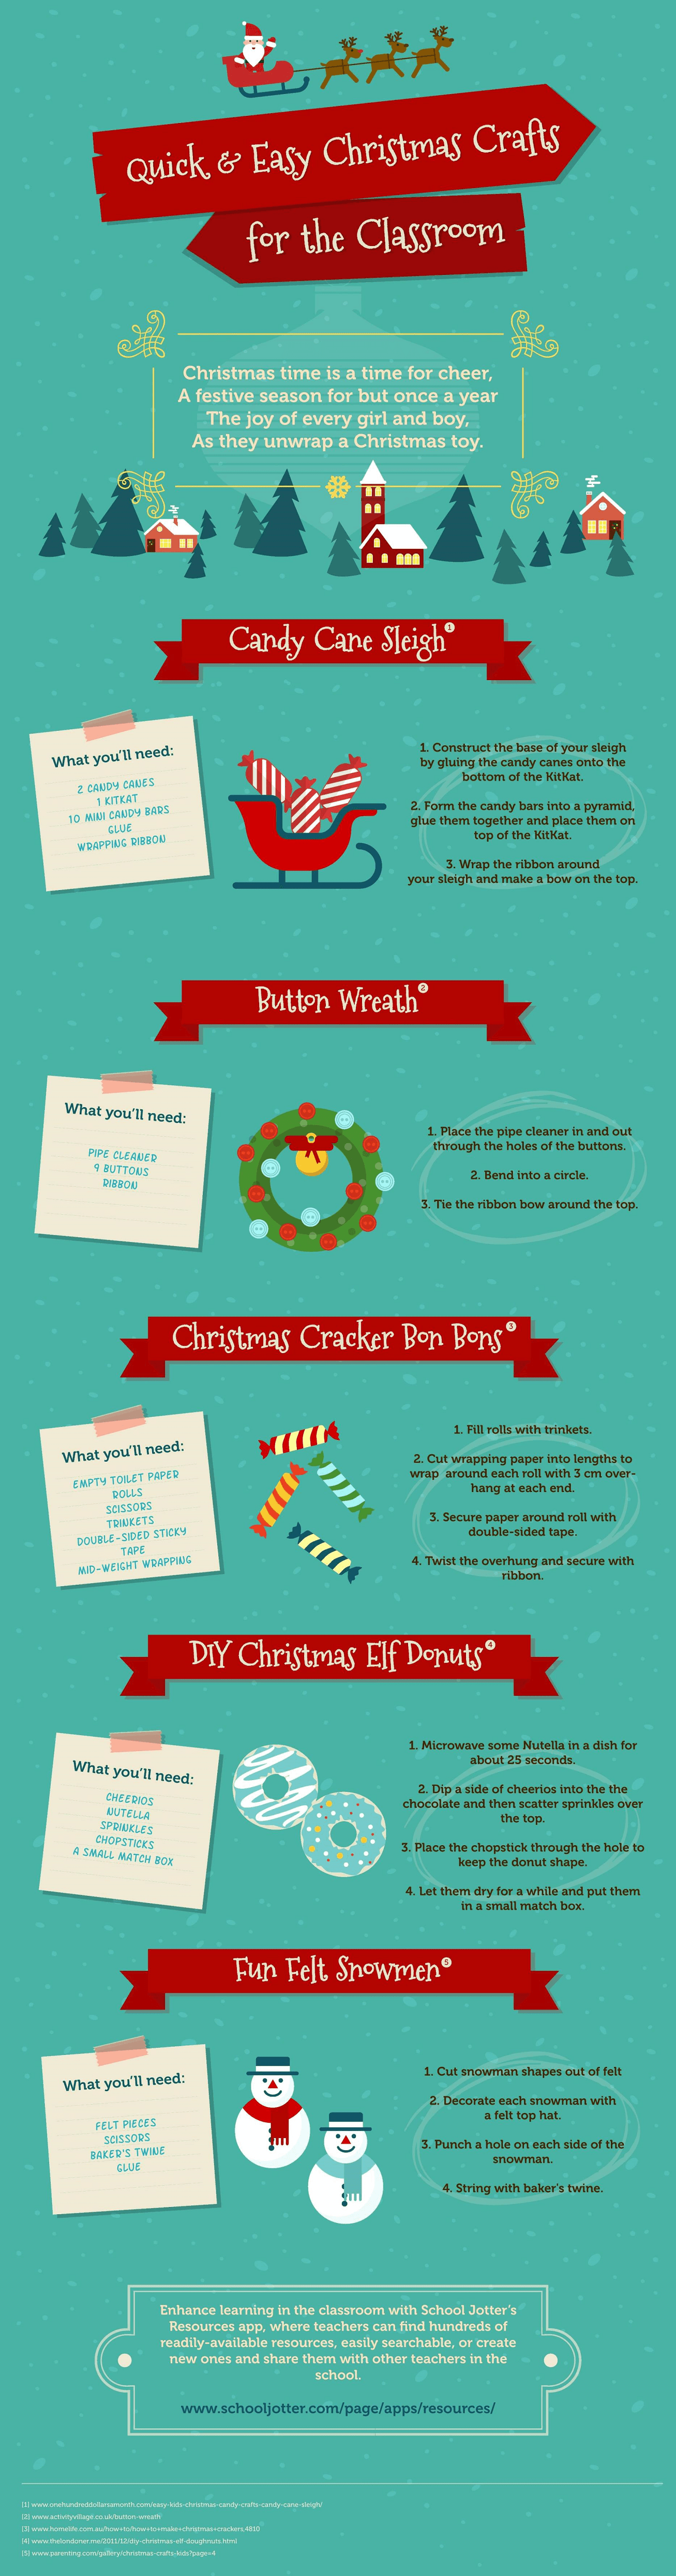 Quick & Easy Christmas Crafts for the Classroom Infographic